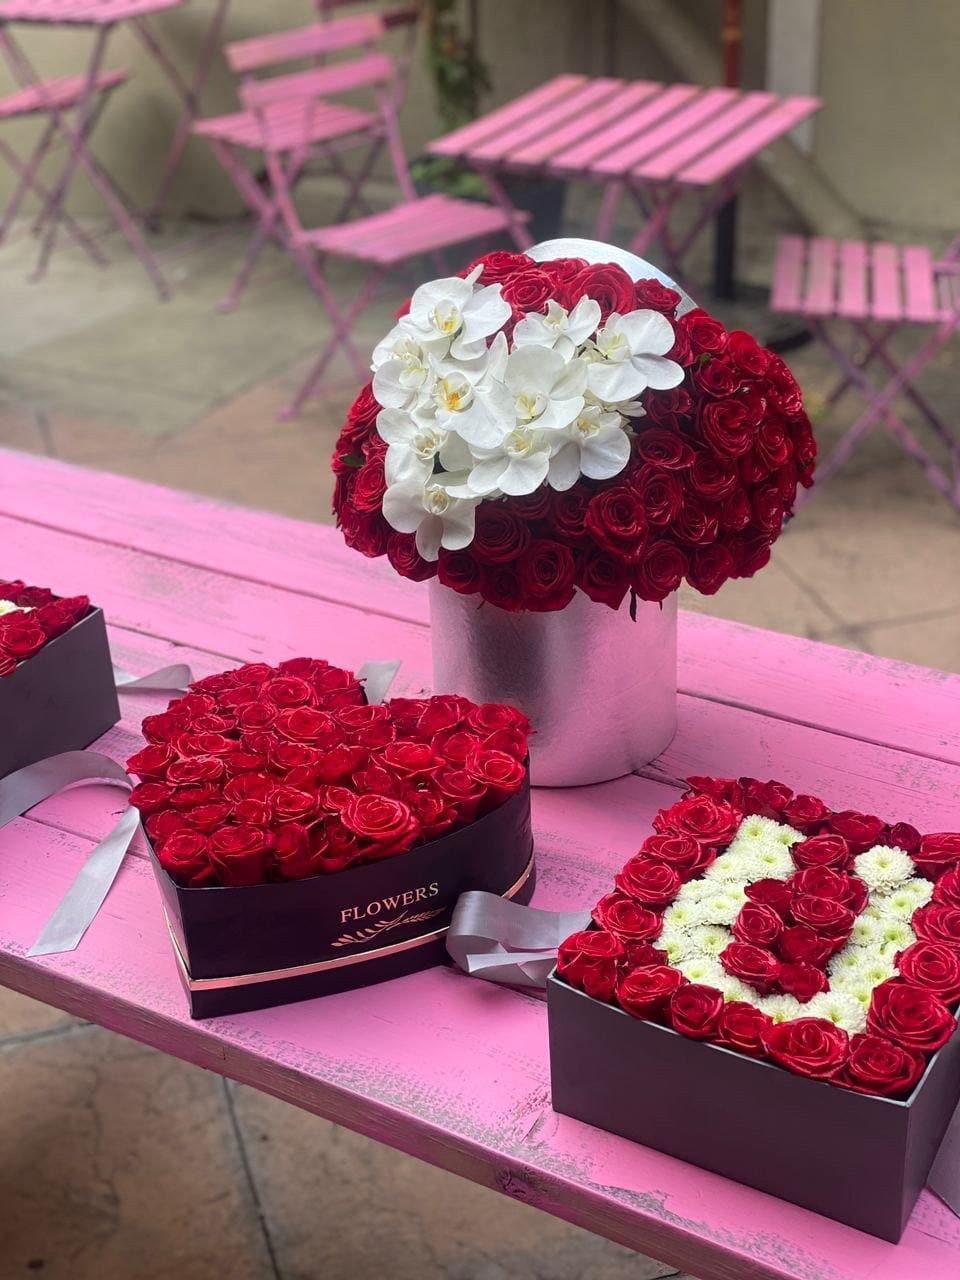 Boxes “I LOVE YOU” - 3 boxes - Los Angeles Florist - Pink Clover